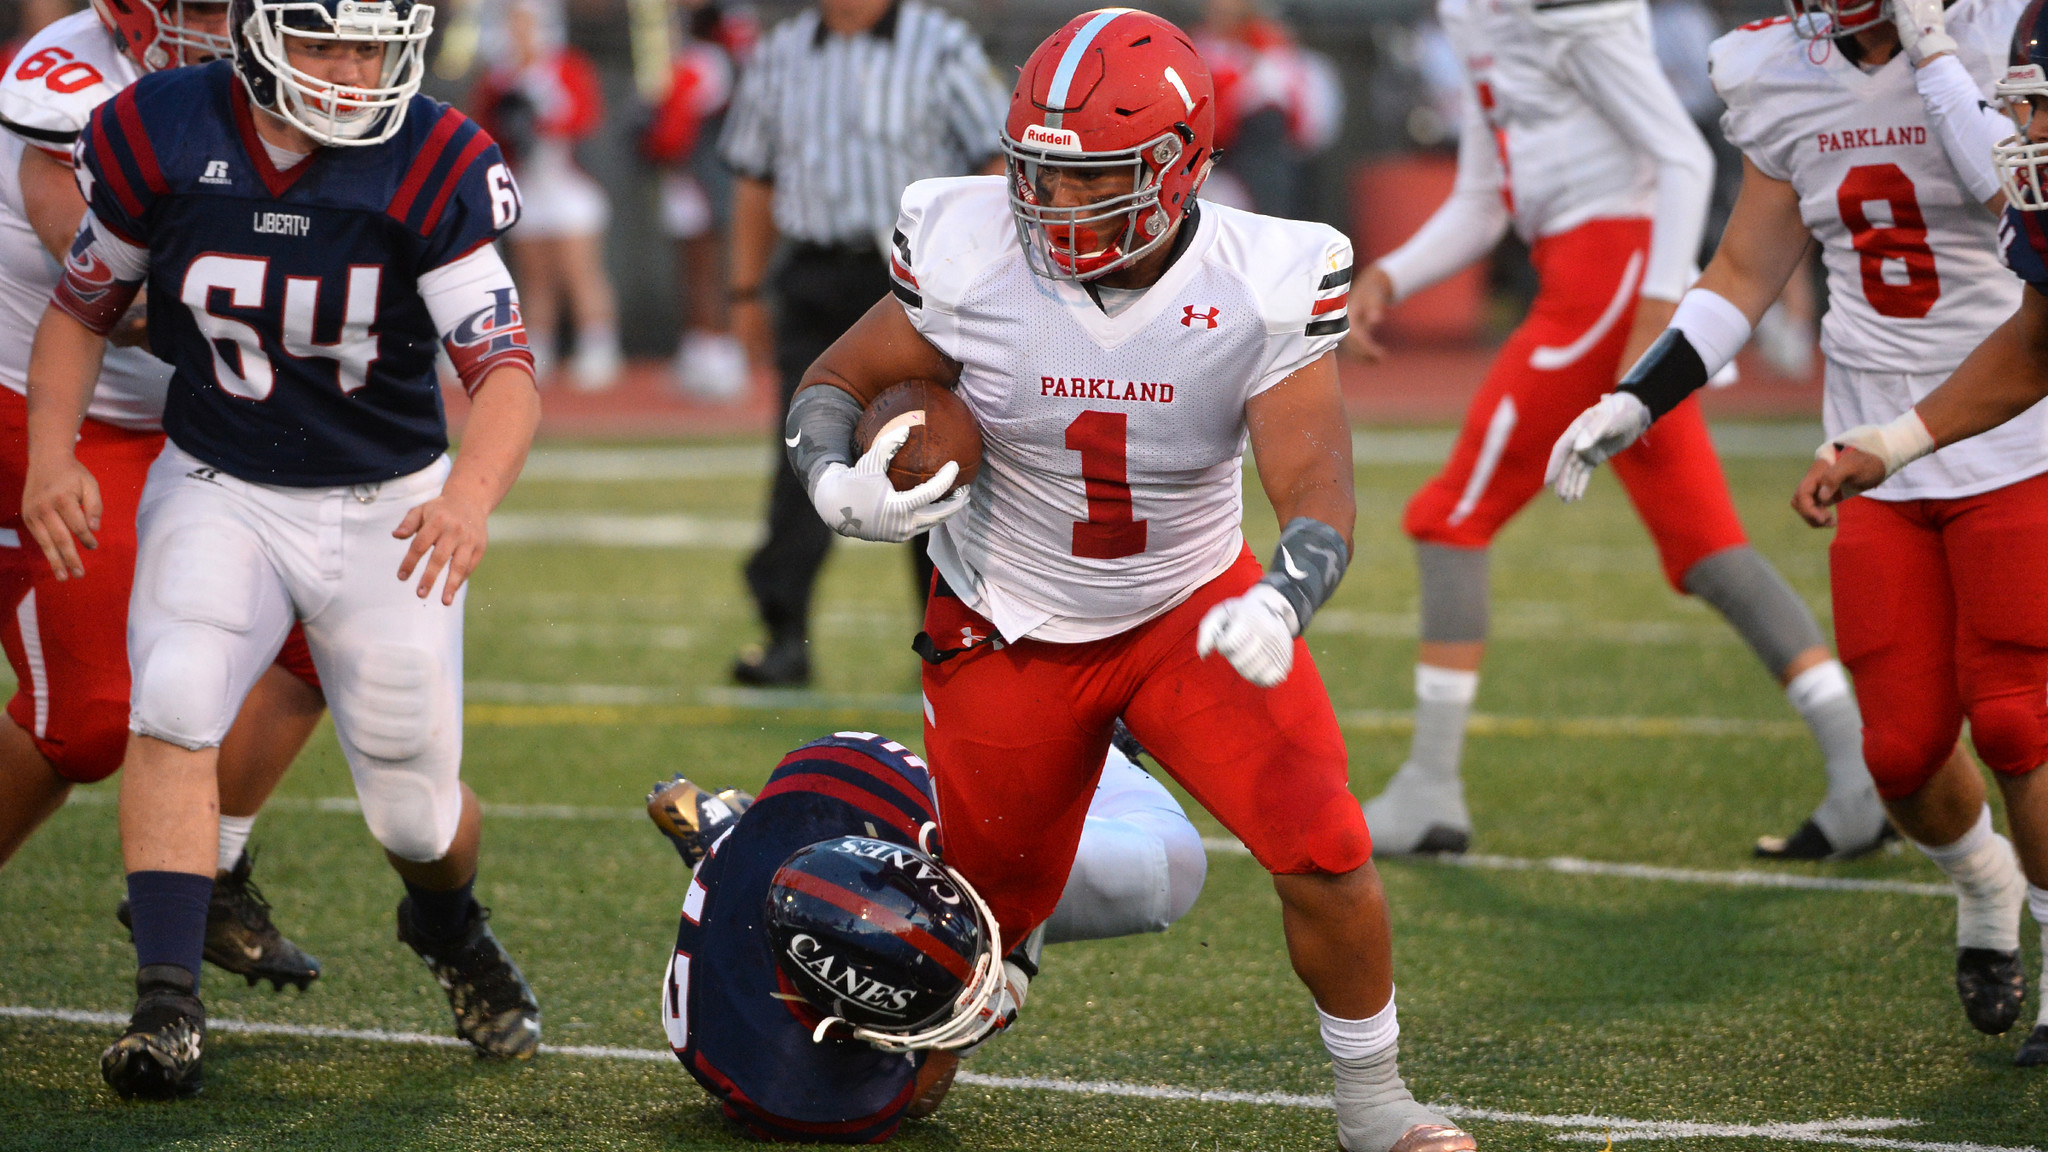 Parkland football rushes to win over Liberty, 24-7 - The Morning Call